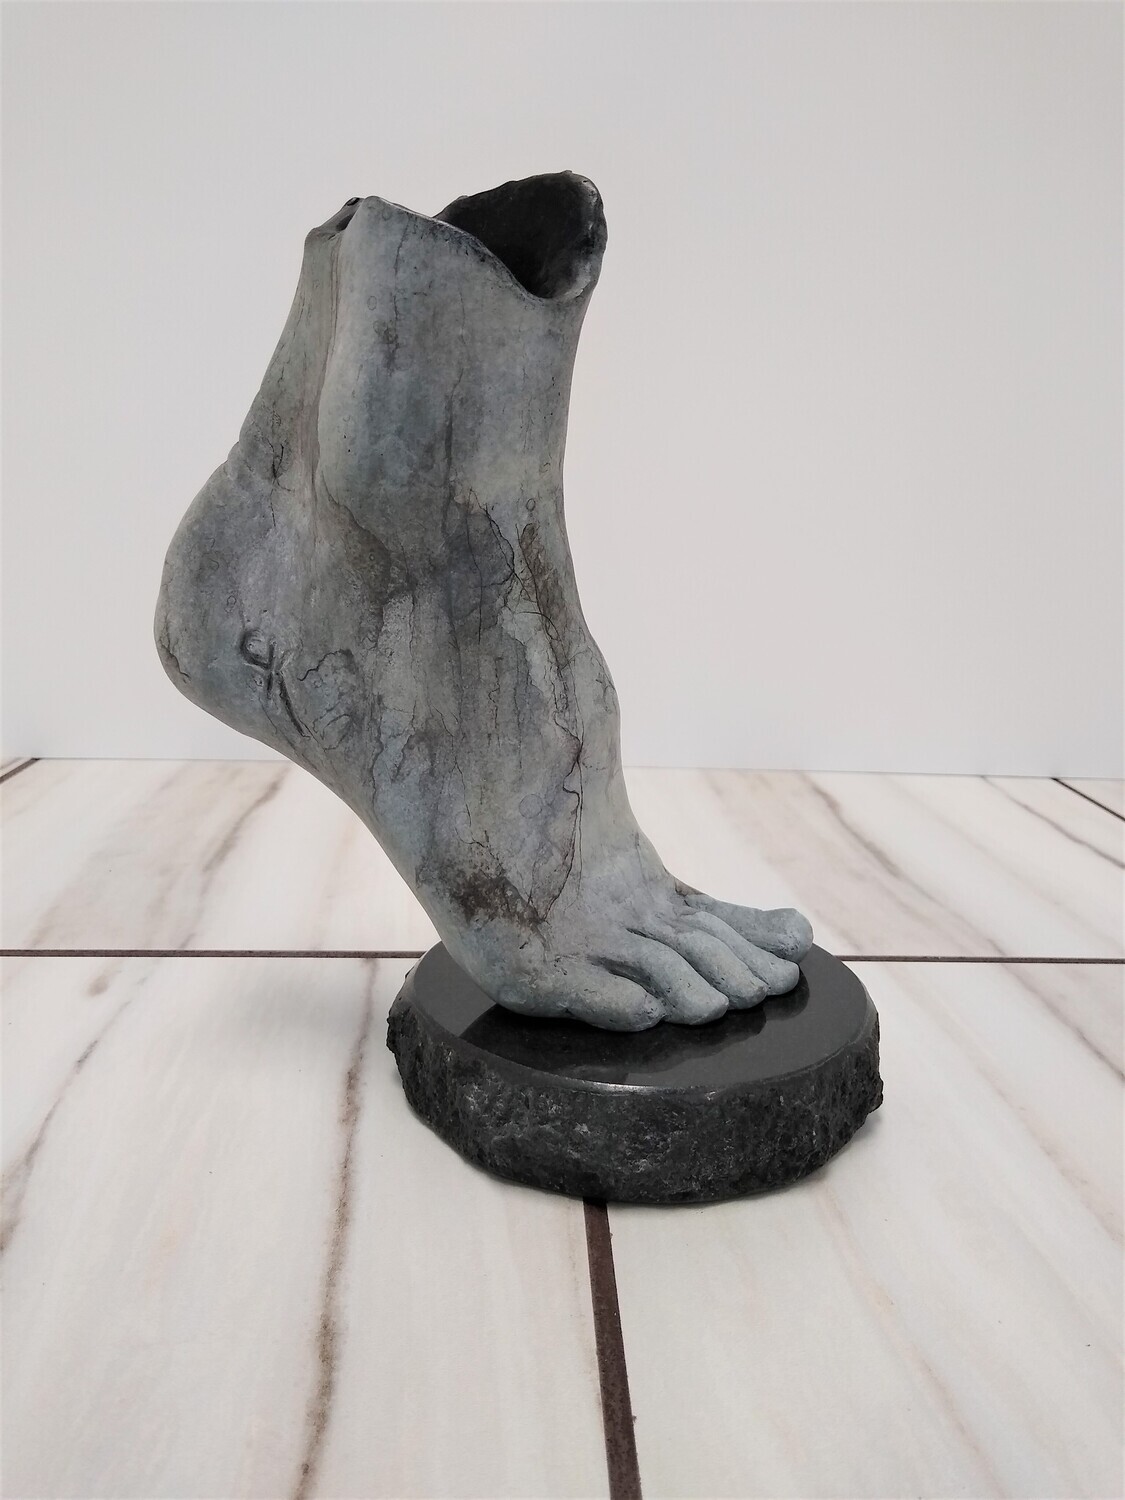 Foot Fragment - $ 5940.00
(Contact us regarding a shipping quote)